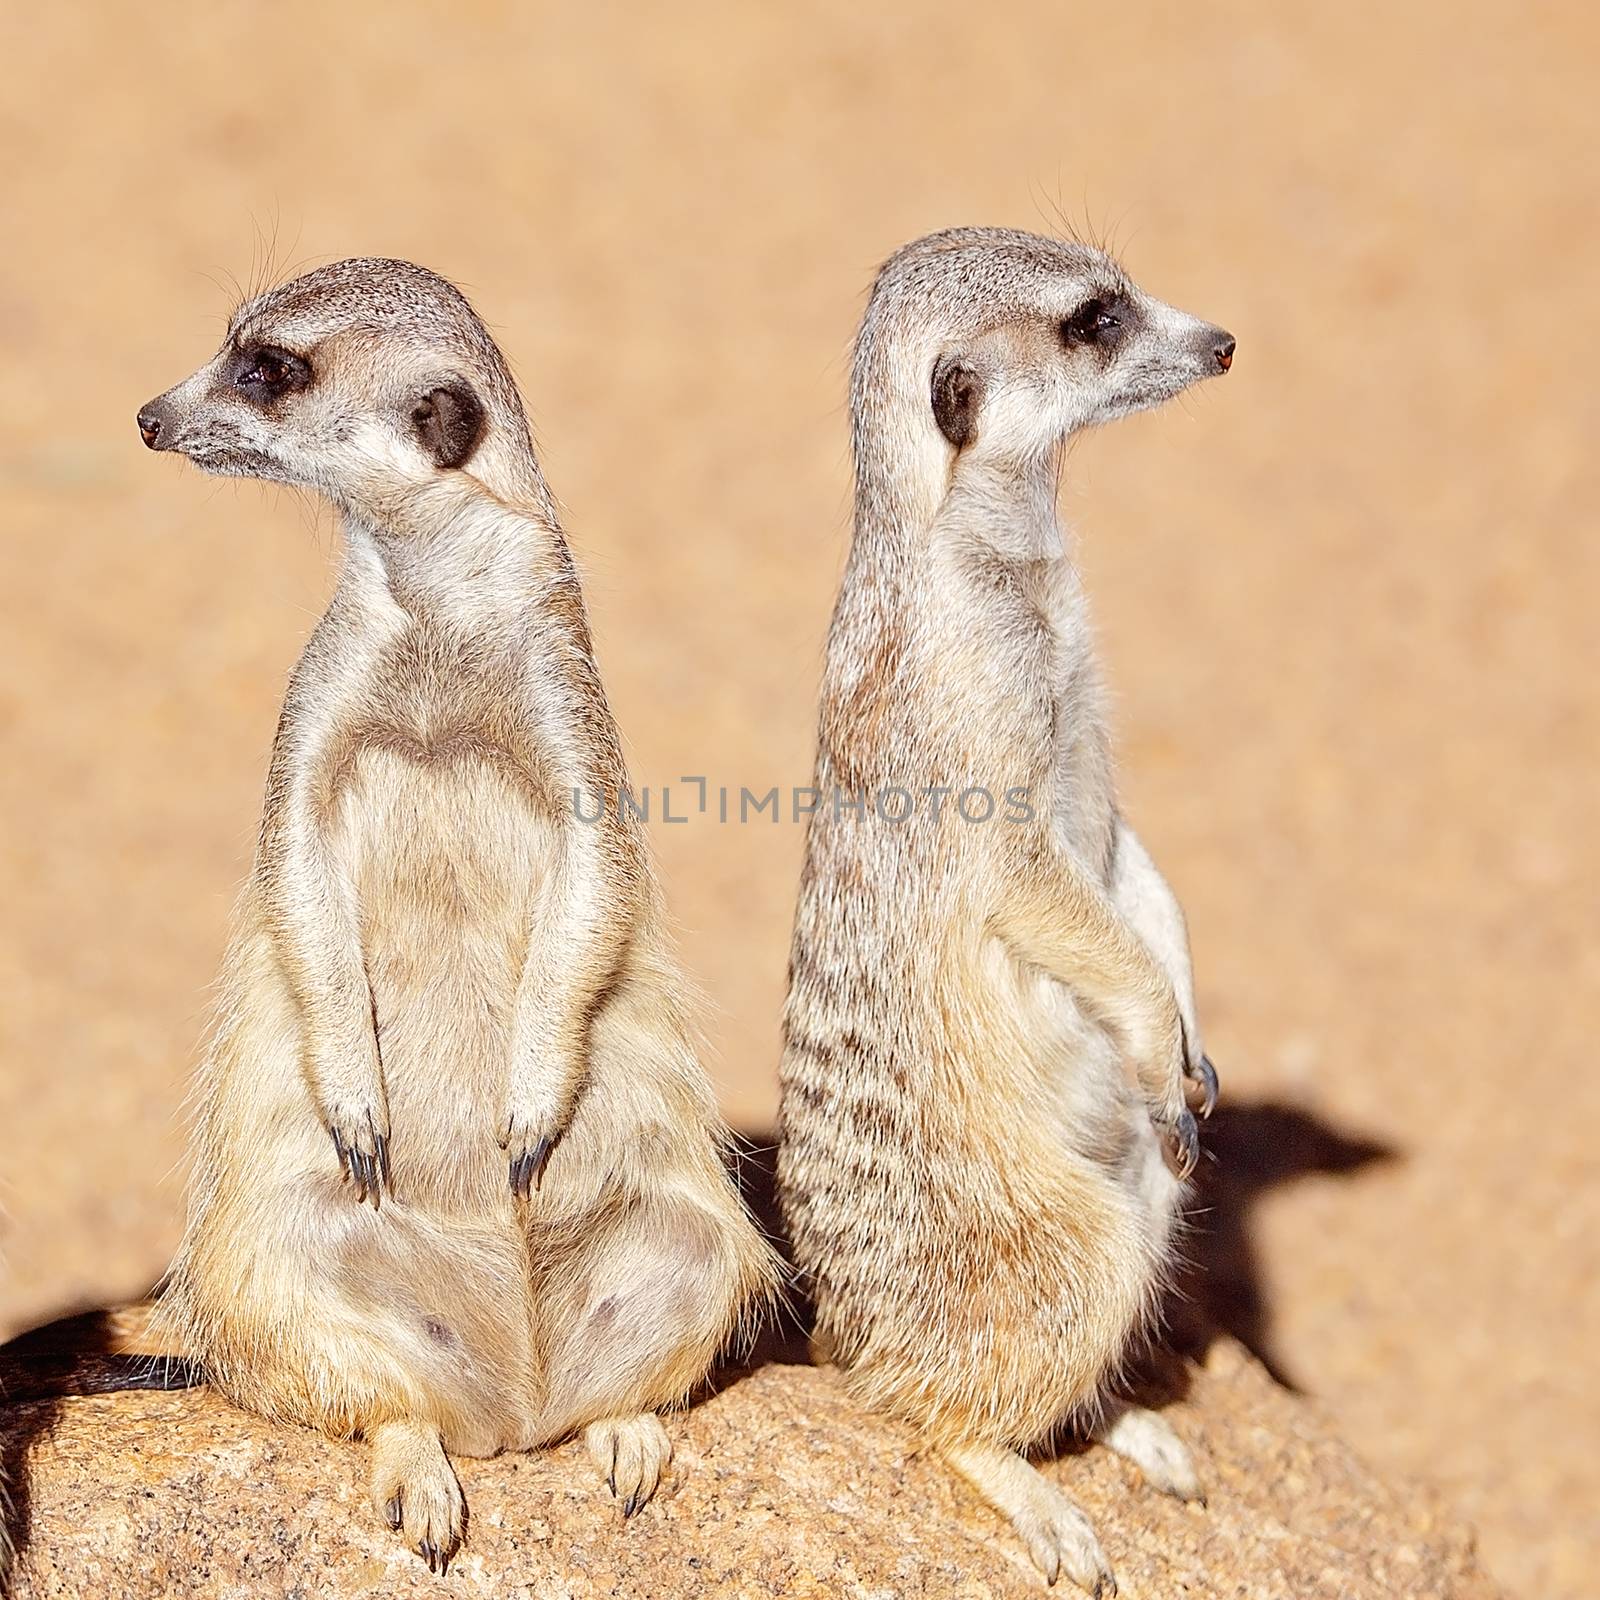 A pair of meerkats standing looking around. These animals belong to the mongoose family. Here they are staring inquisitively.